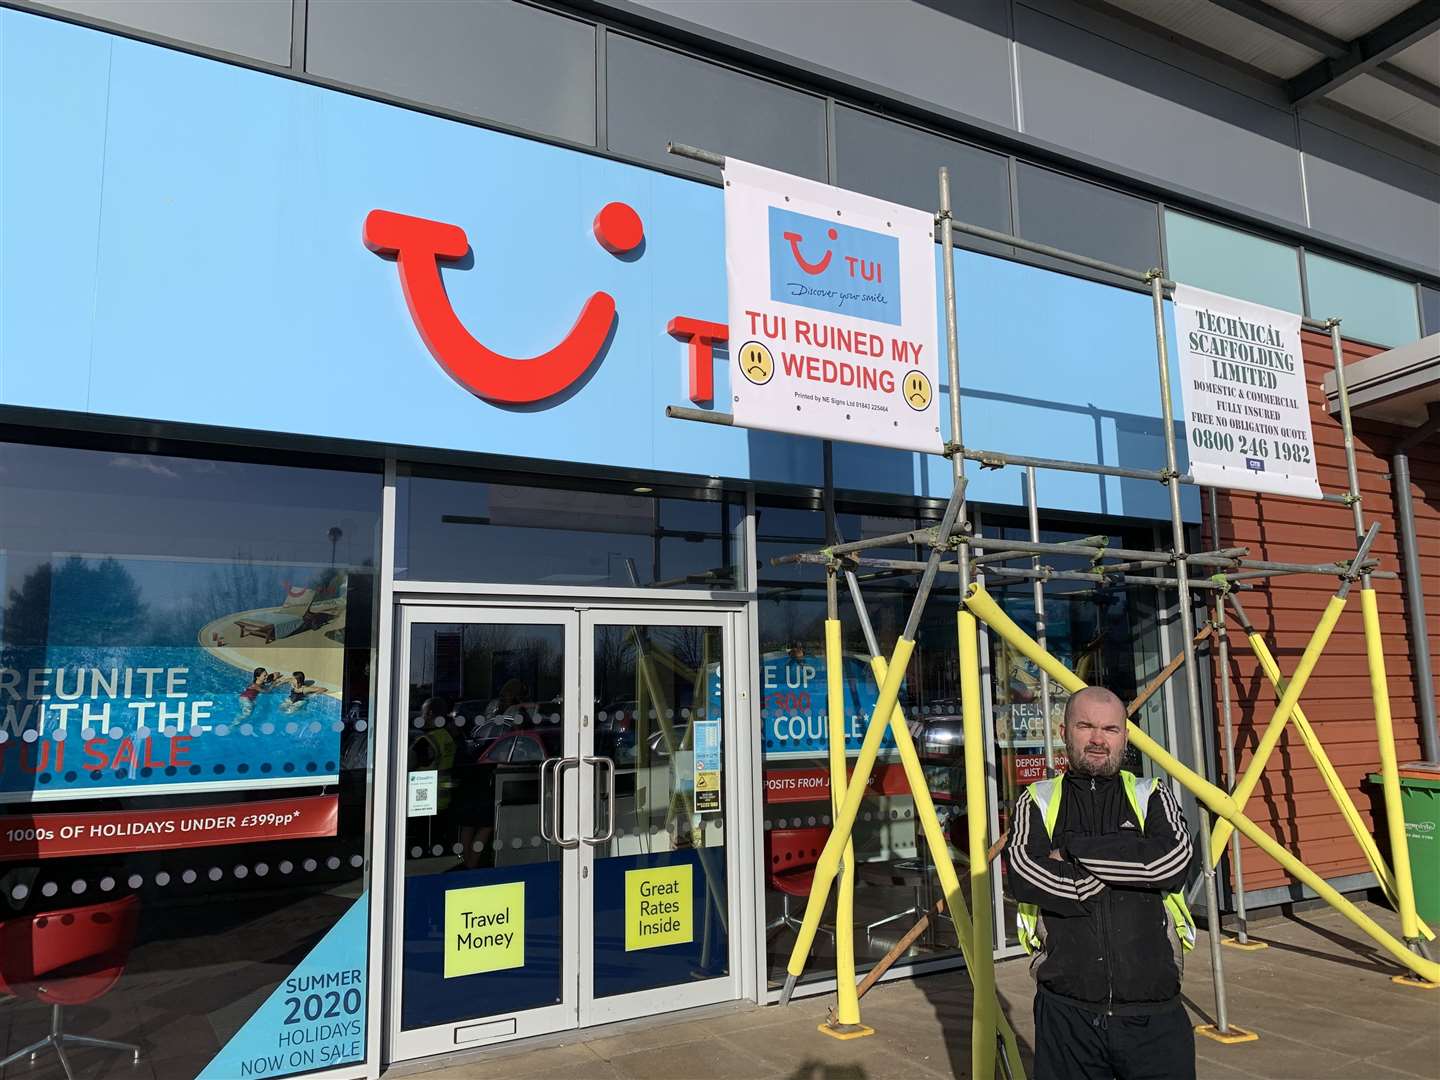 Jason Cooper set up a protest outside TUI in Westwood Cross, saying the holiday firm ruined his wedding